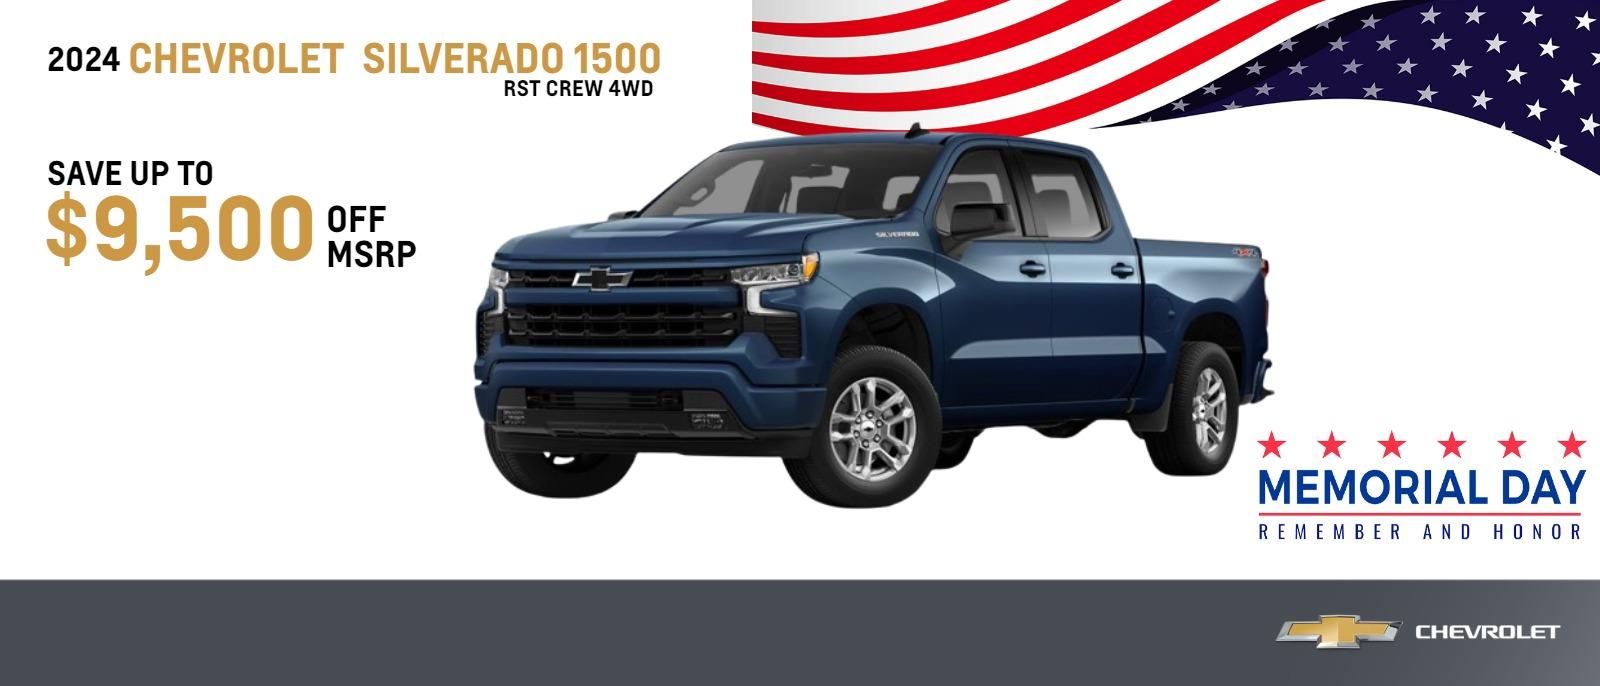 2024 Chevrolet Silverado 1500 RST Crew 4WD
OFFER = Save up to $9,500 OFF MSRP